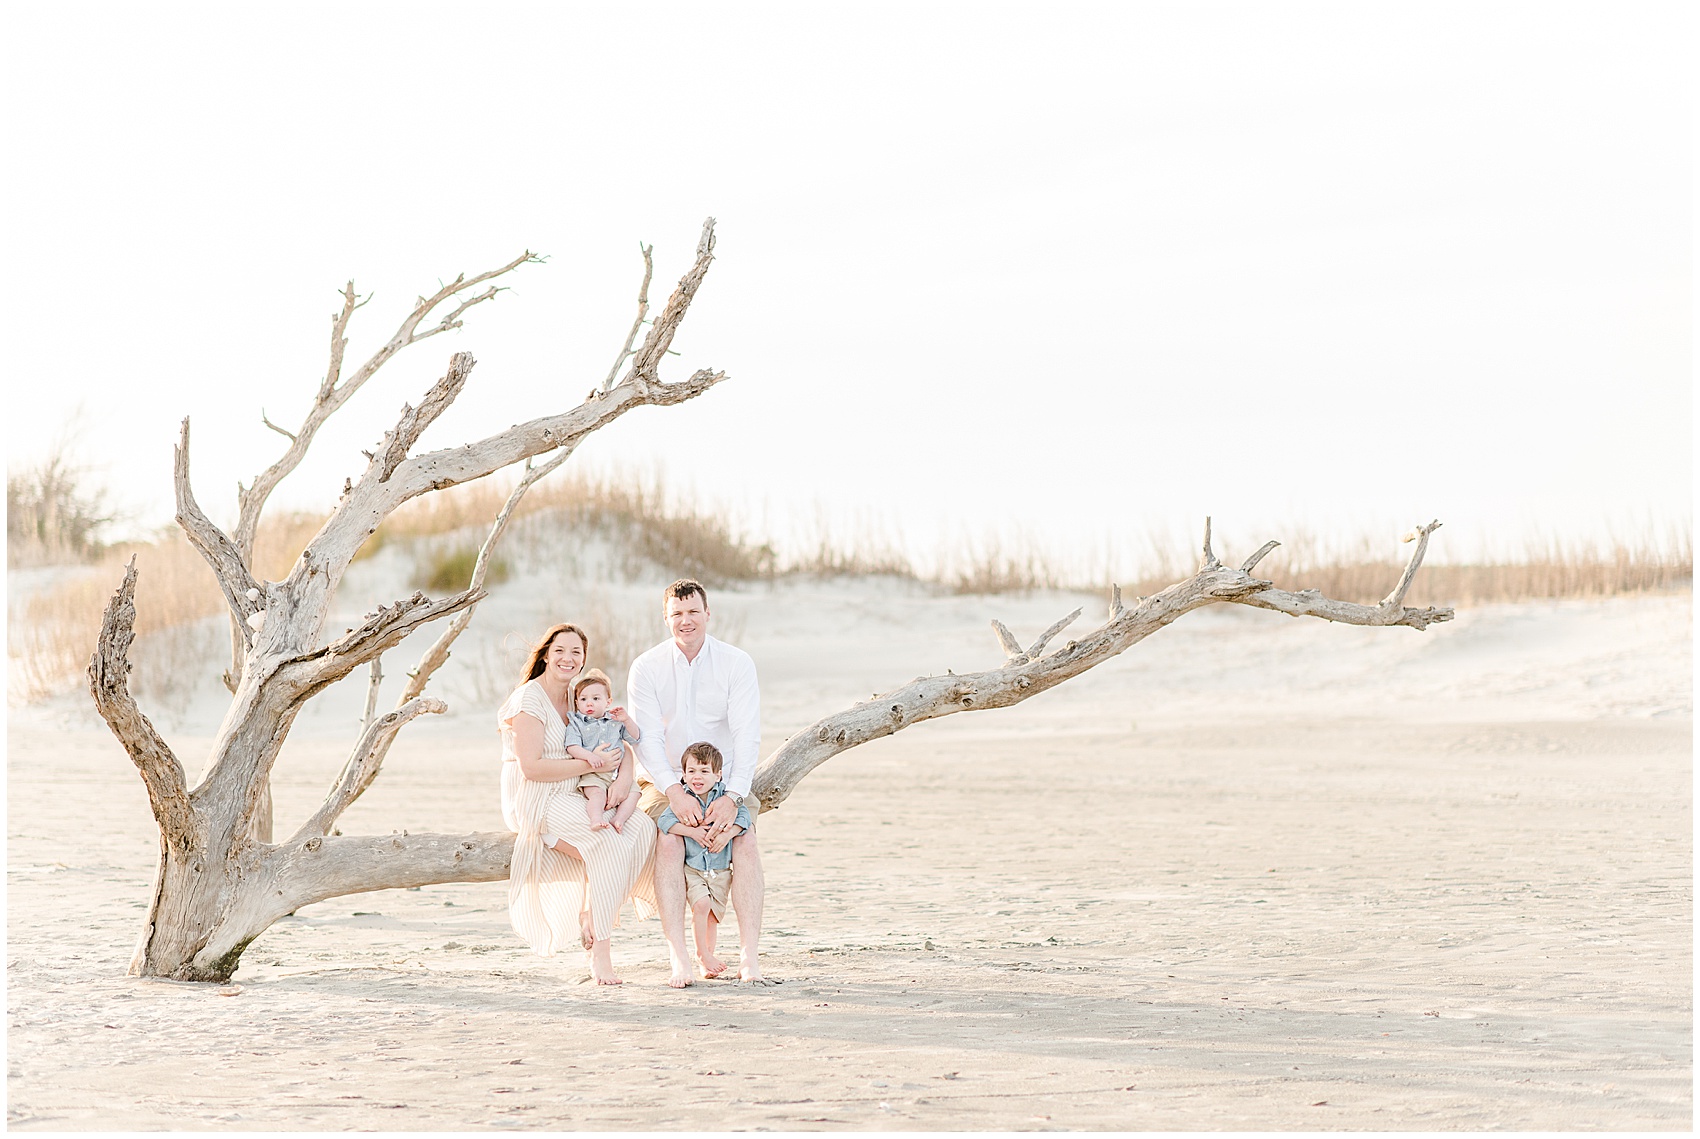 south of broad downtown Charlestion Folly Beach charleston wedding photographer session Lowcountry Charleston SC wedding Photographer_1977.jpg